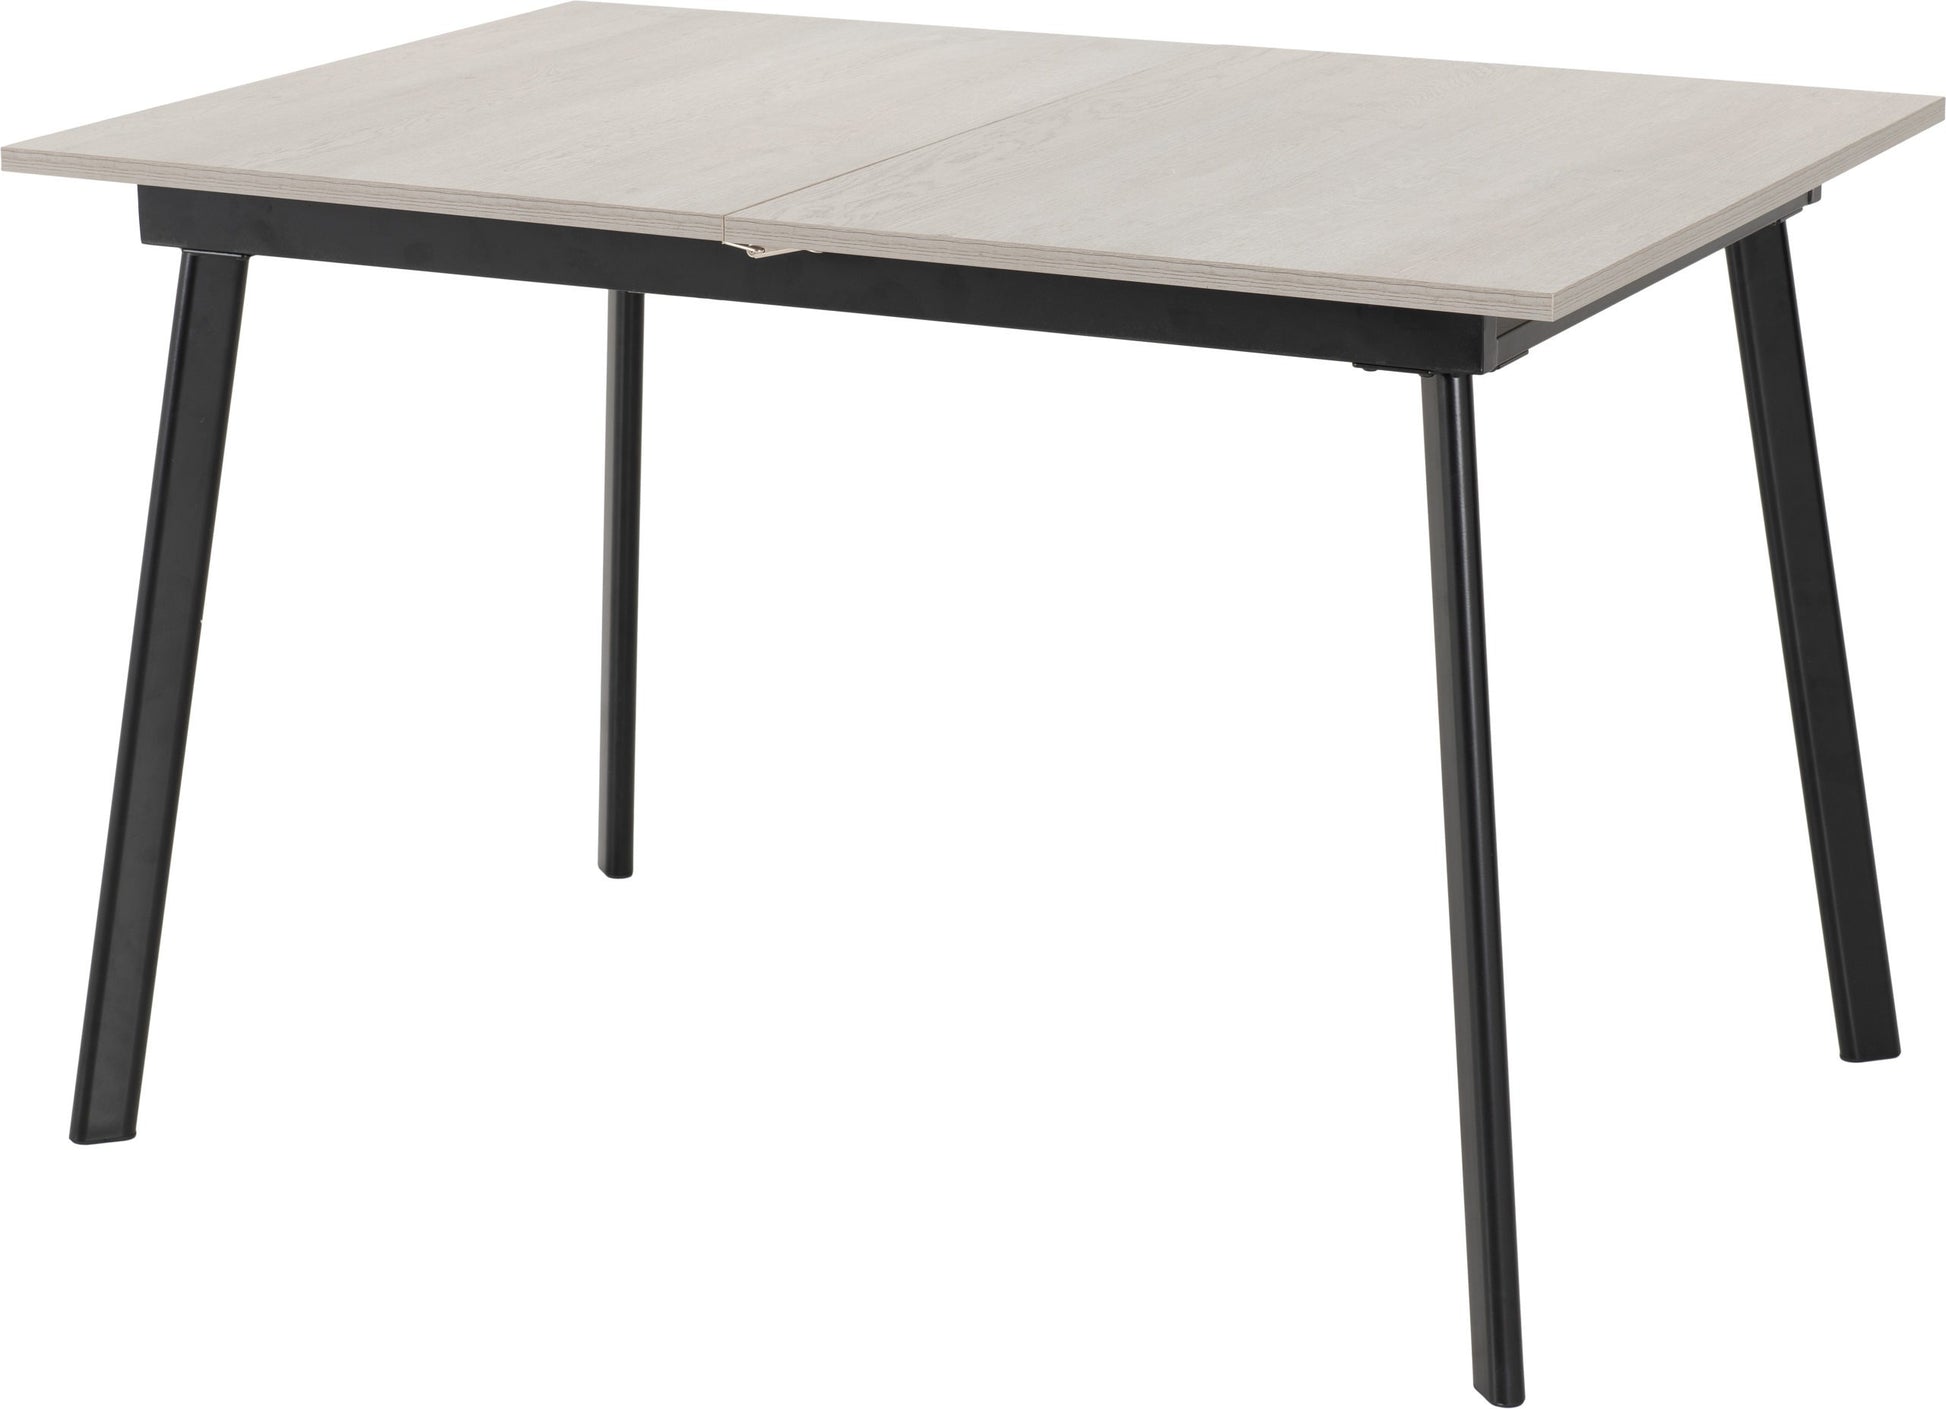 Avery Extending Dining Table Concrete/Grey- The Right Buy Store